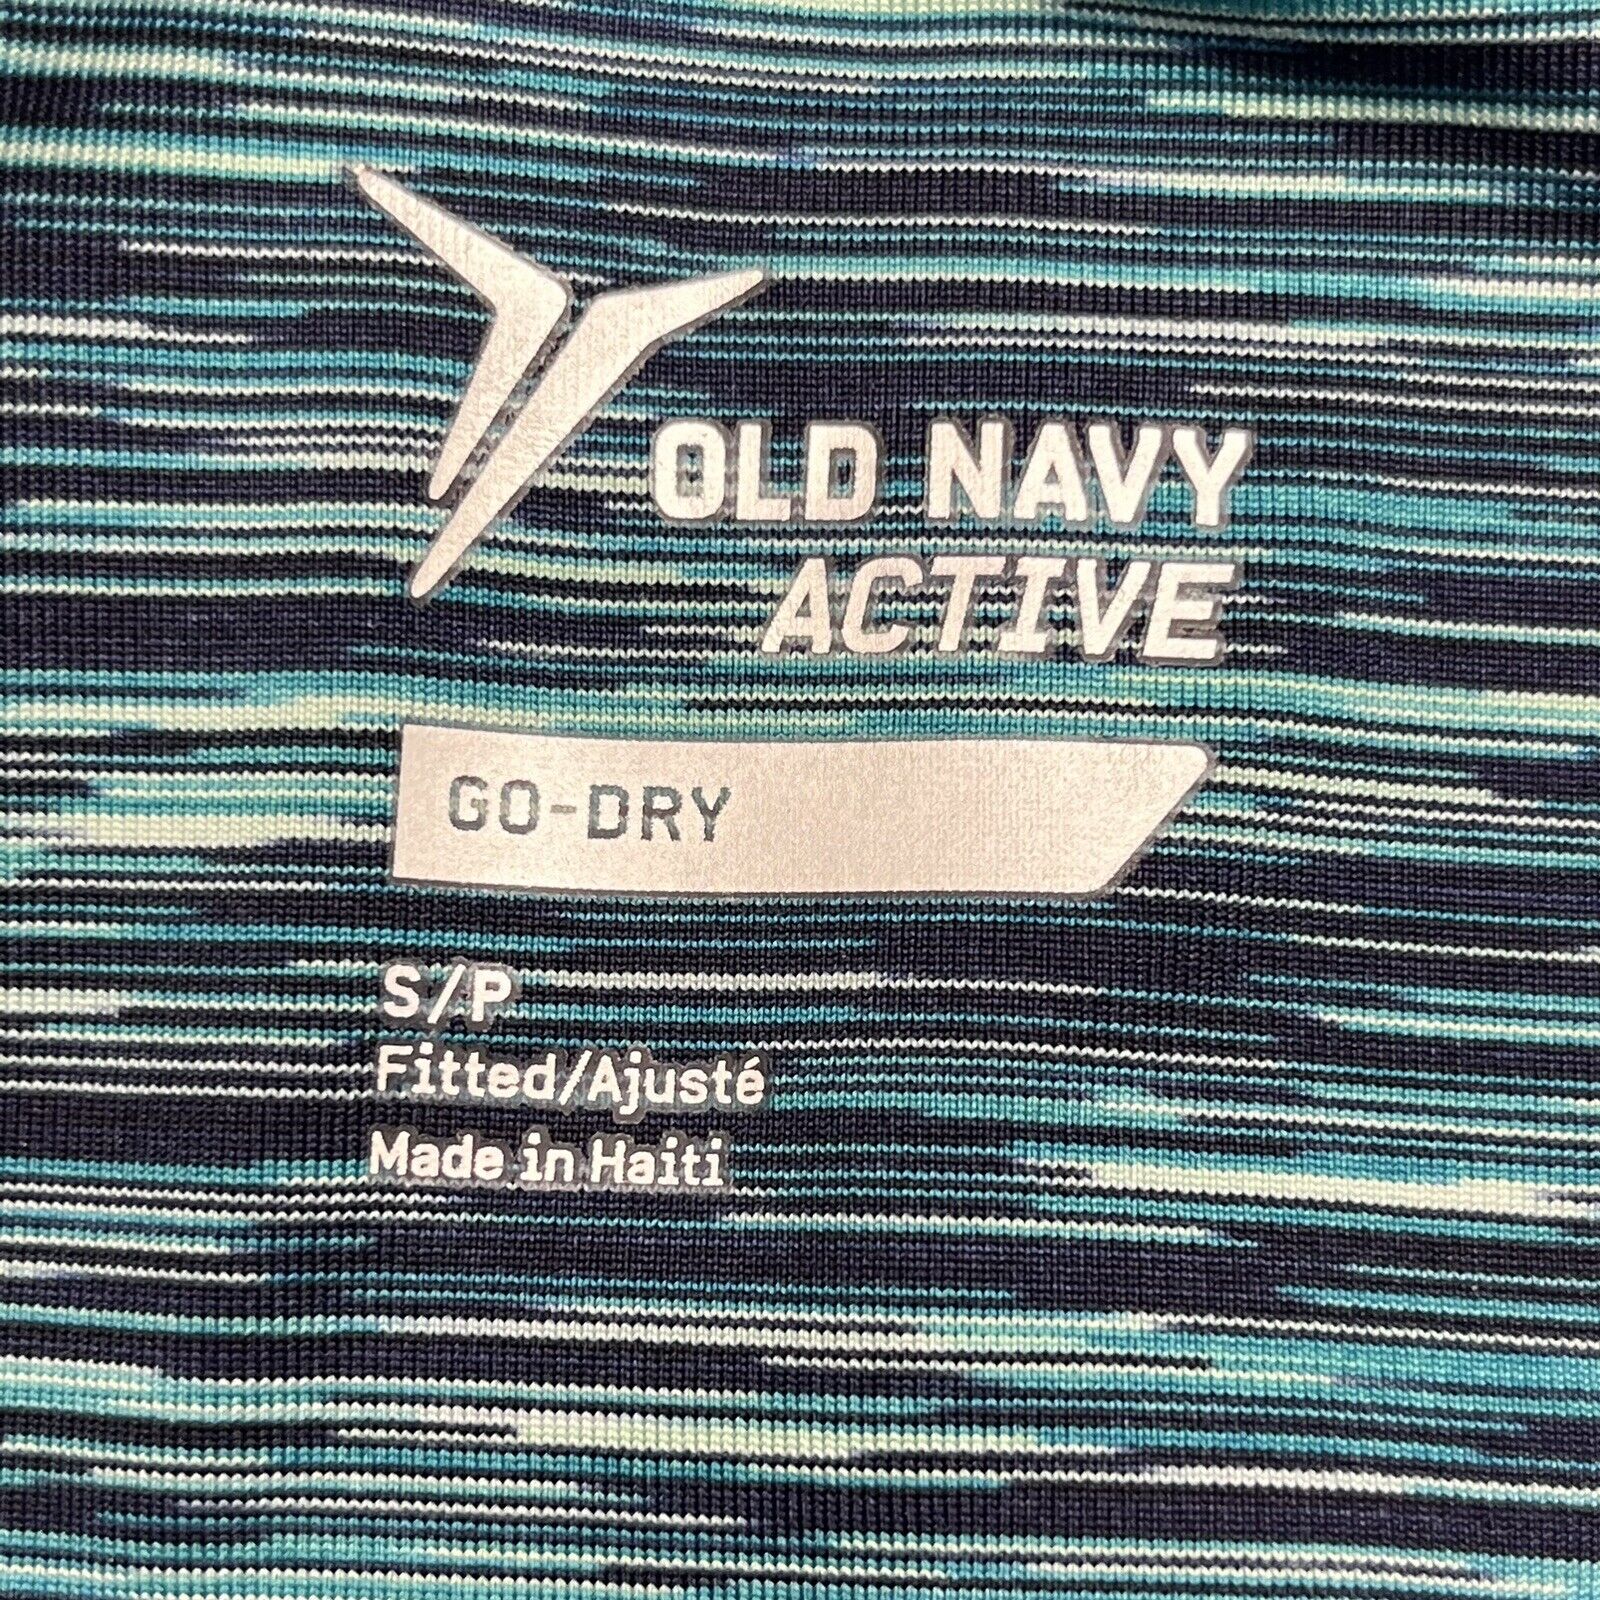 OLD NAVY ACTIVE Women GO DRY Blue/Black Patterned Fitted /Ajuste Leggings  Sz S/P